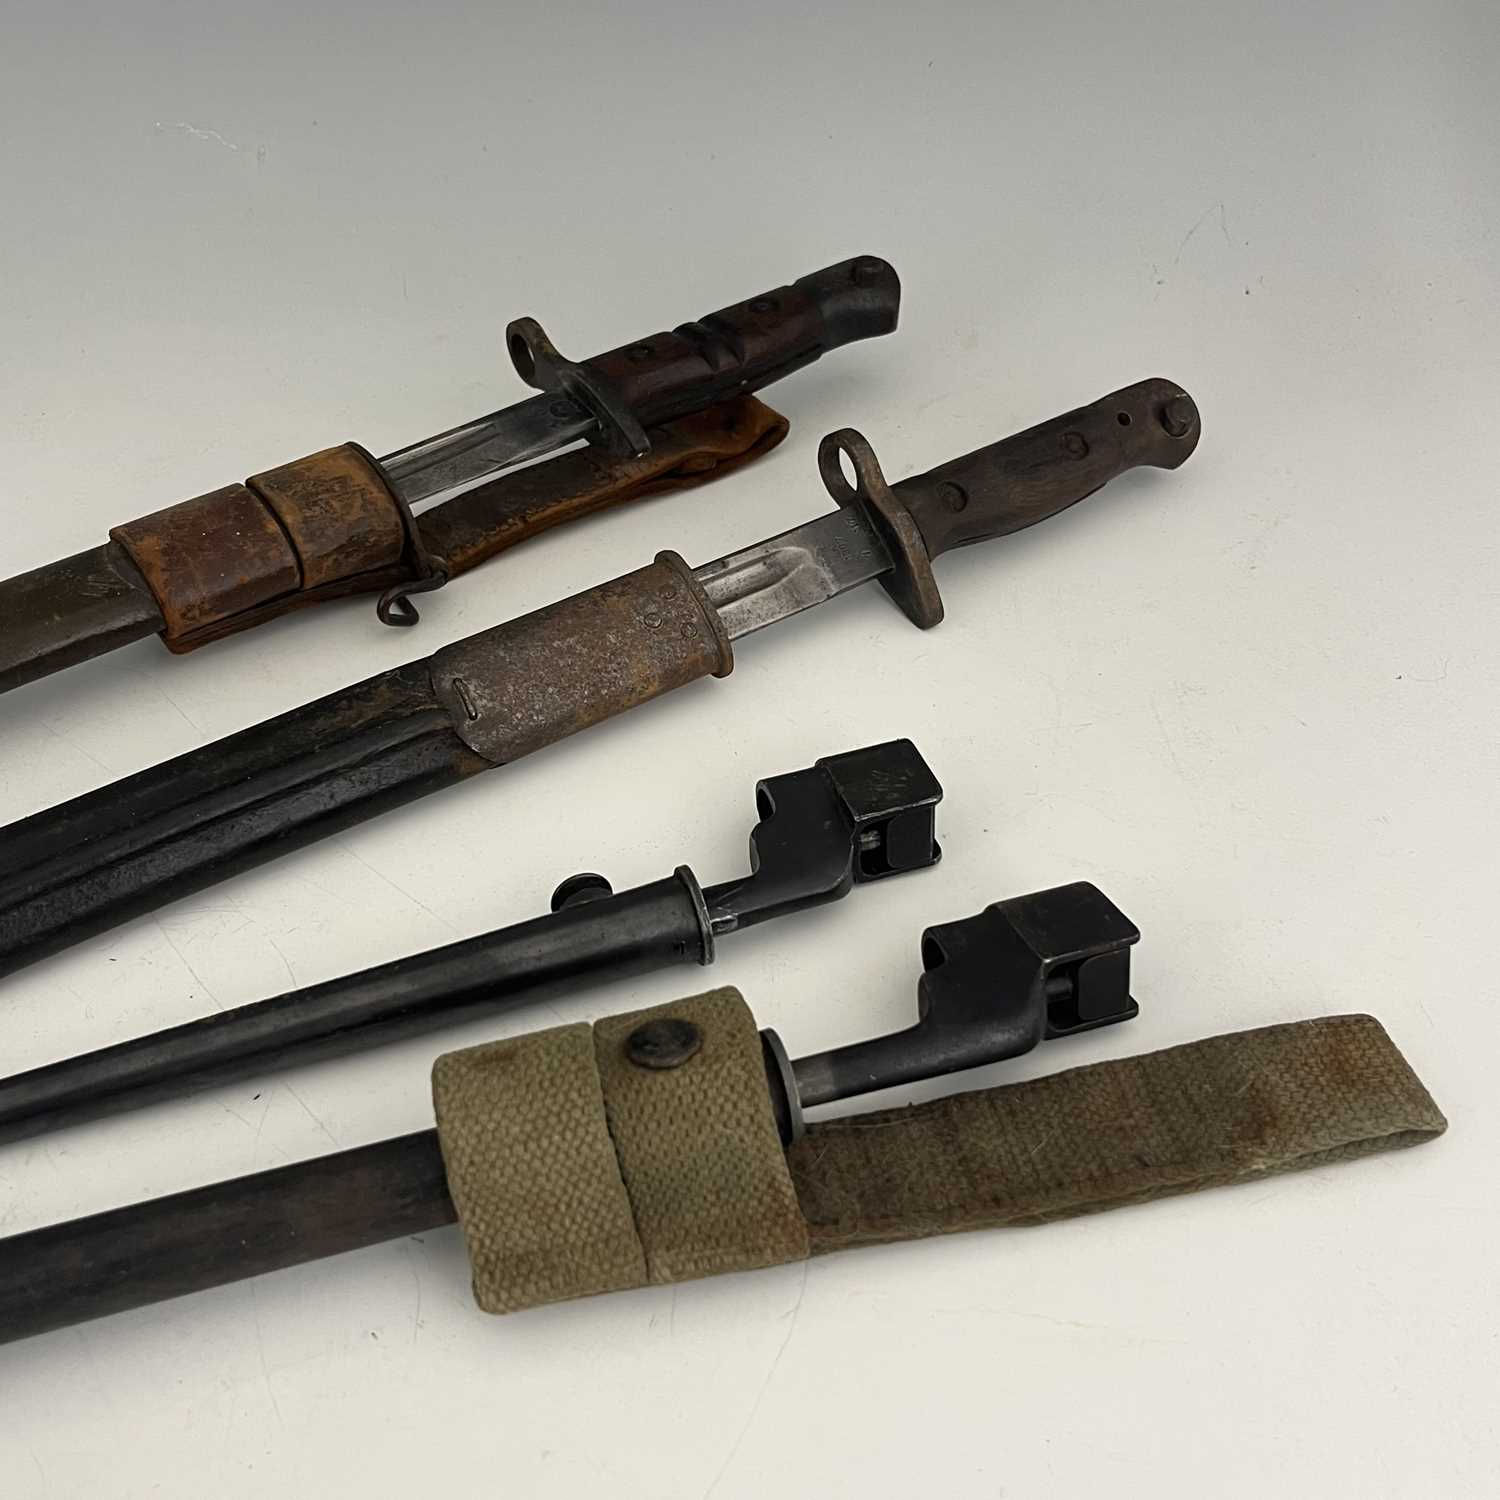 Four British bayonets, including a 1907 pattern SMLE sword bayonet by Remington, two piece wooden